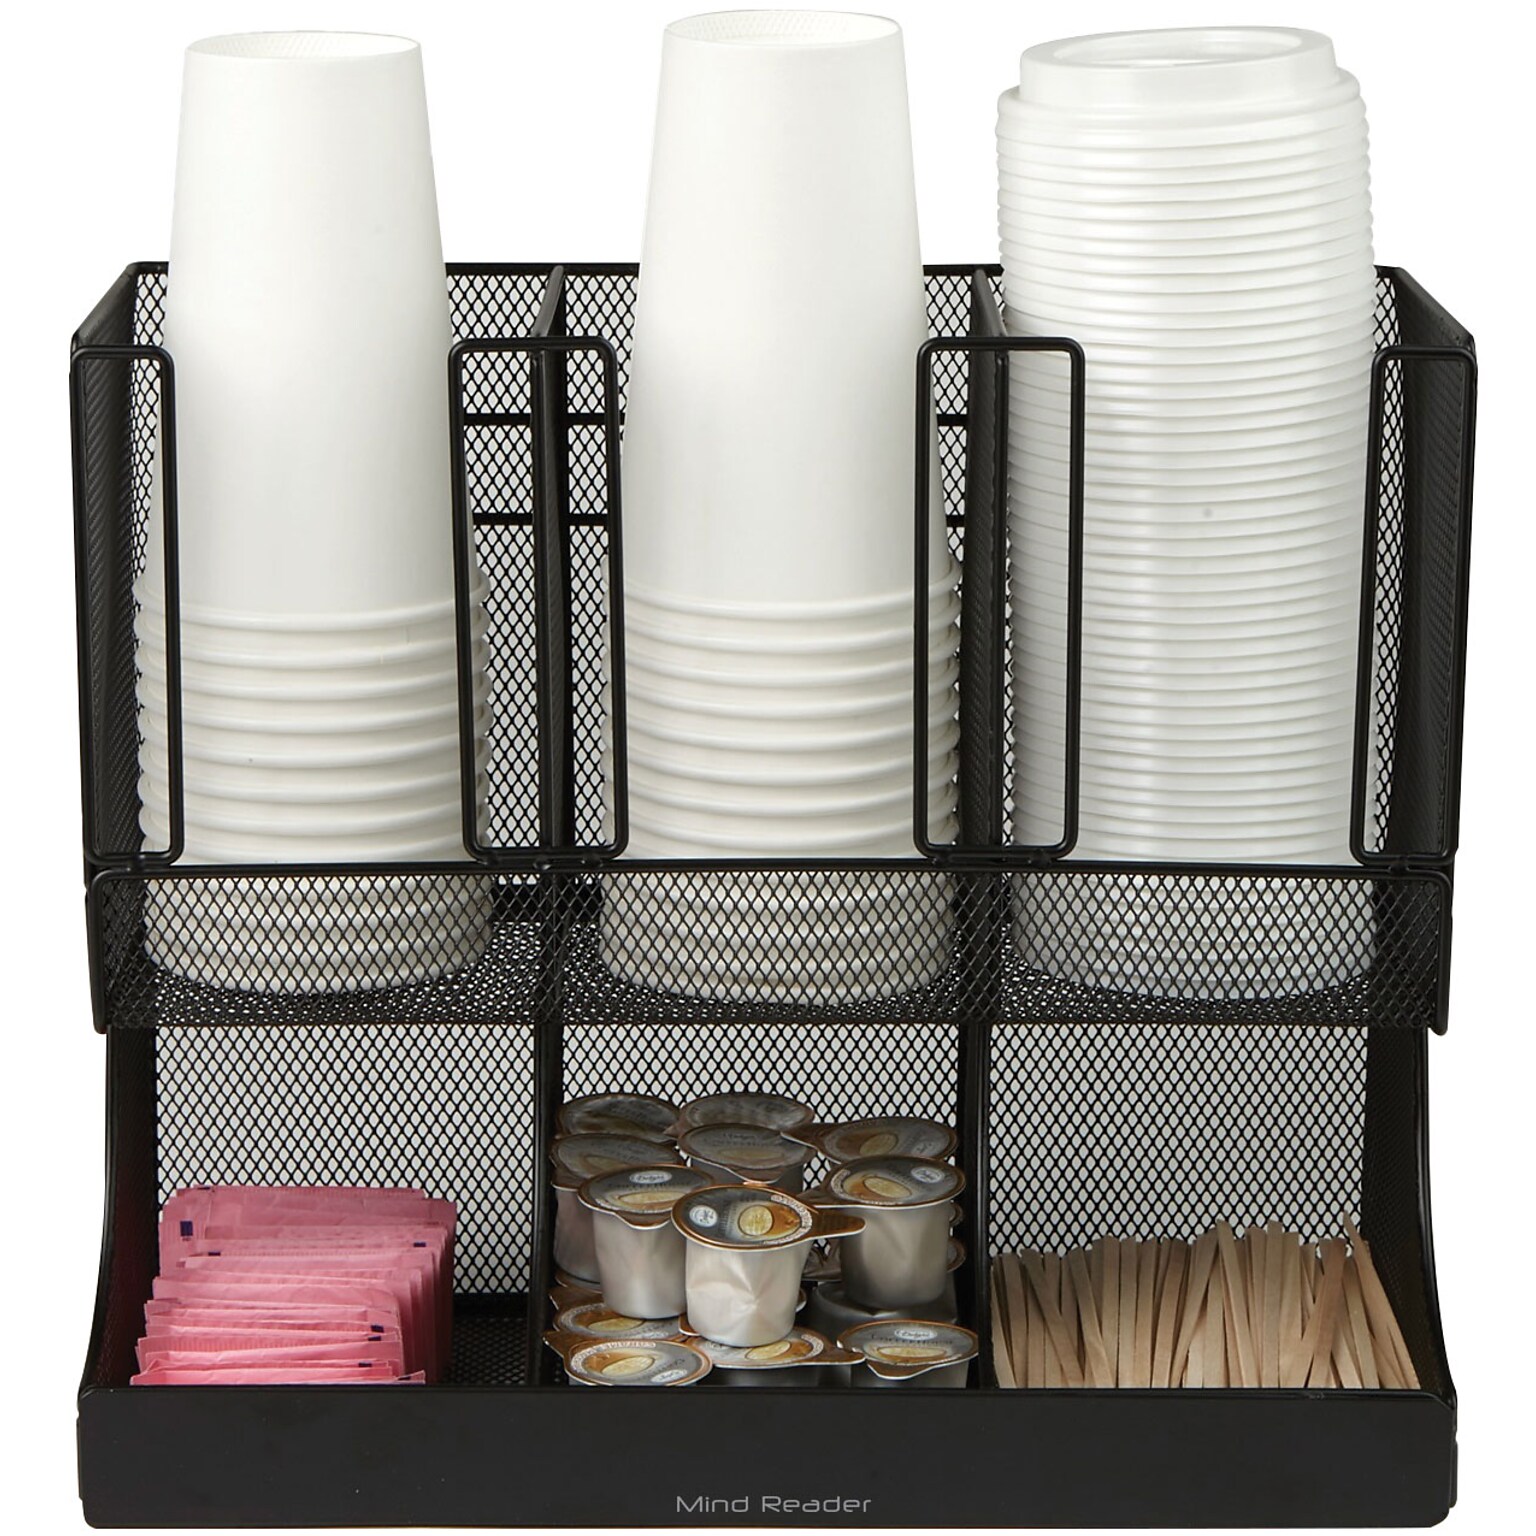 Mind Reader Flume 6 Compartment Coffee Condiment and Cup Organizer, Black Metal Mesh (UPRIGHT6MESH-BL)